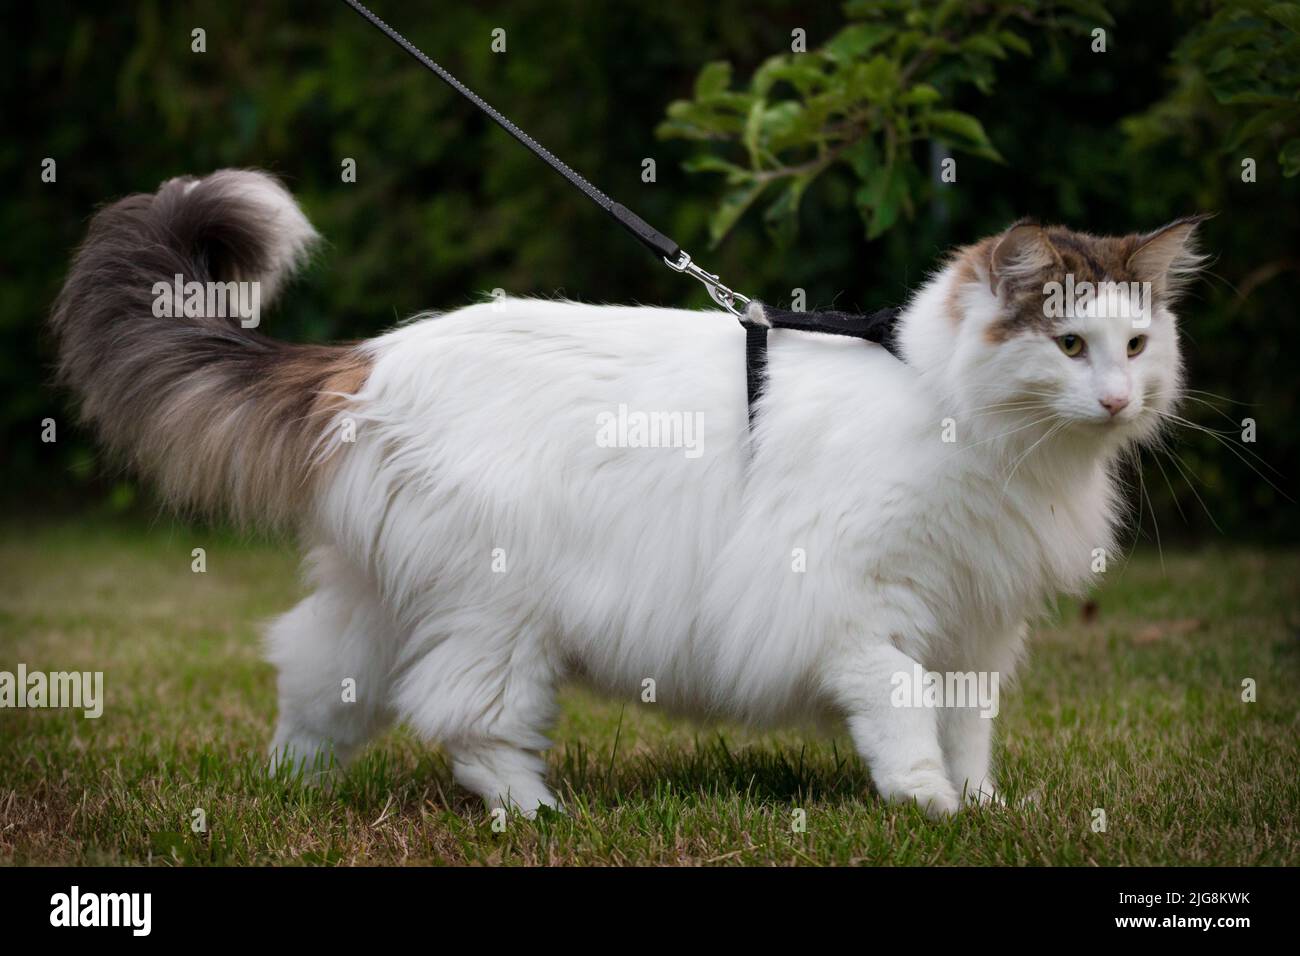 An adorable Norwegian Forest cat on a leash walking in the park Stock Photo